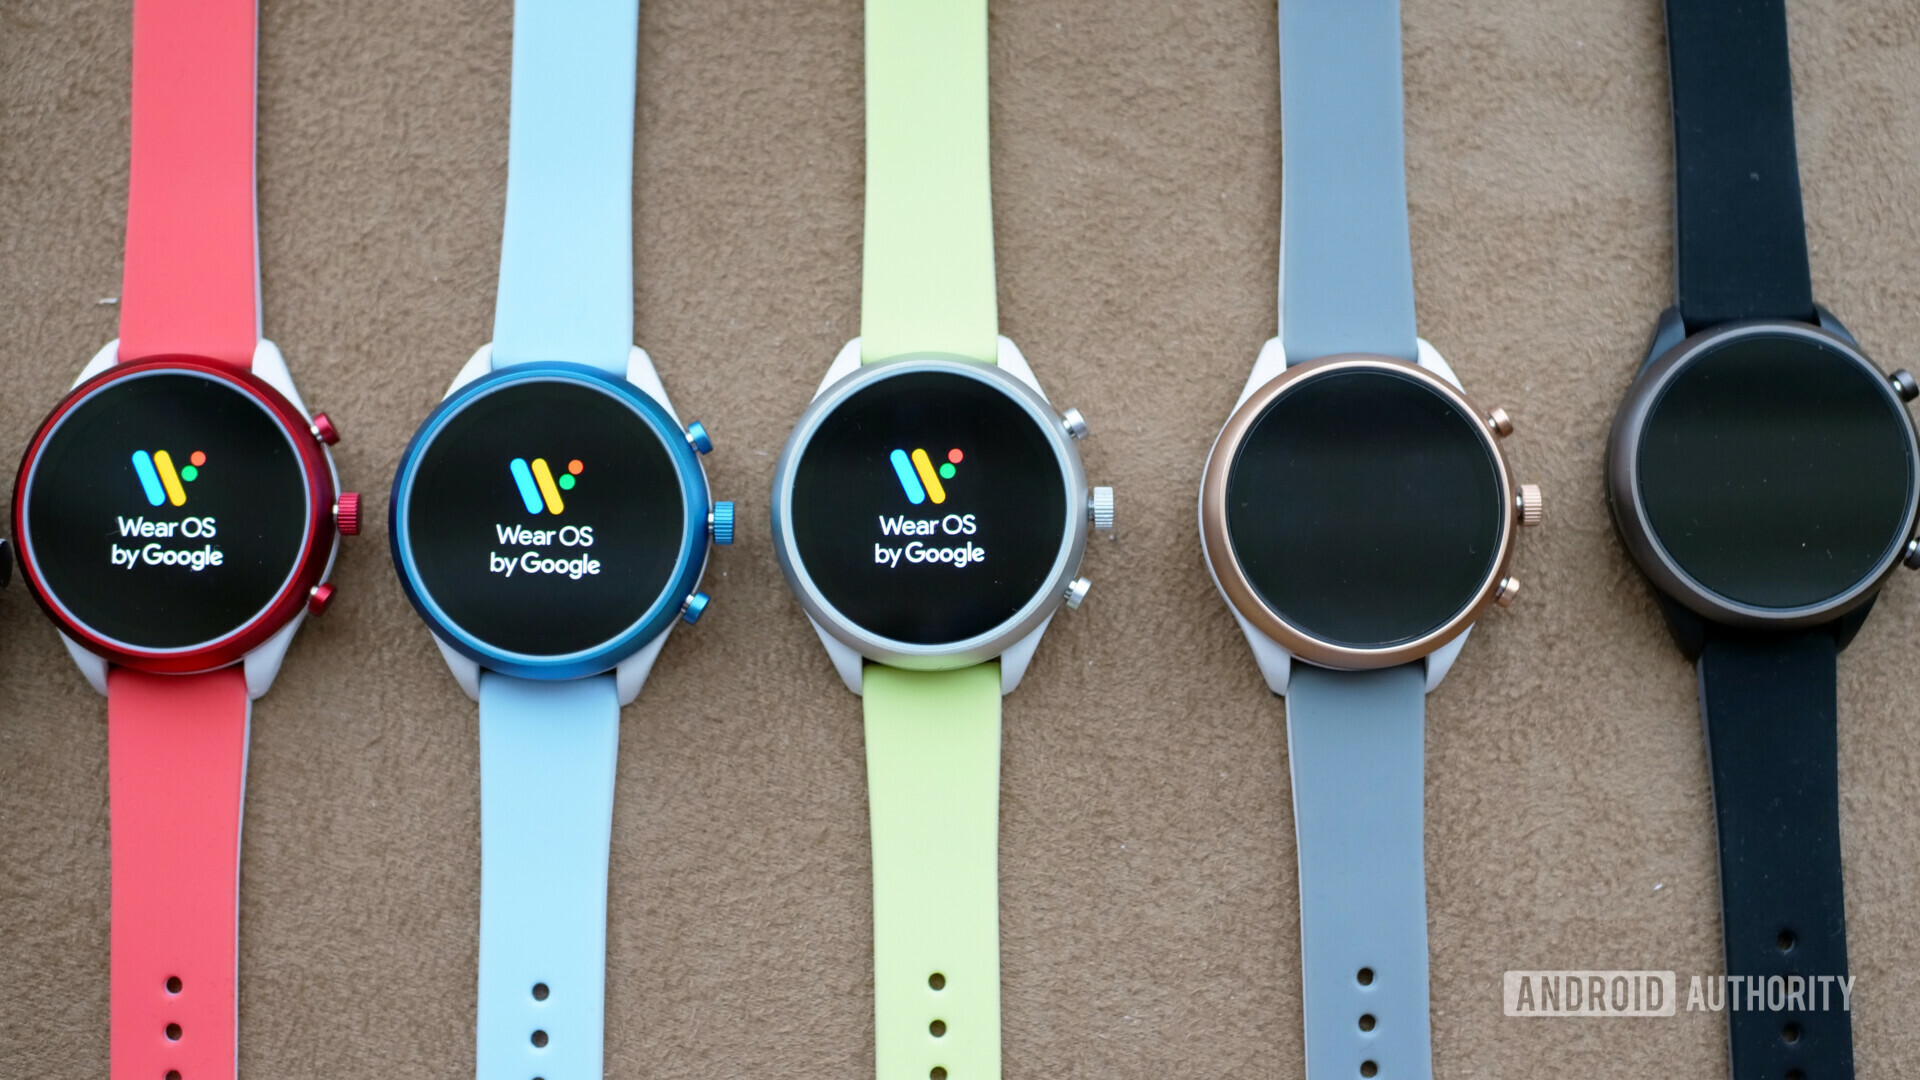 This is the featured image for why Wear OS should get OEM skins